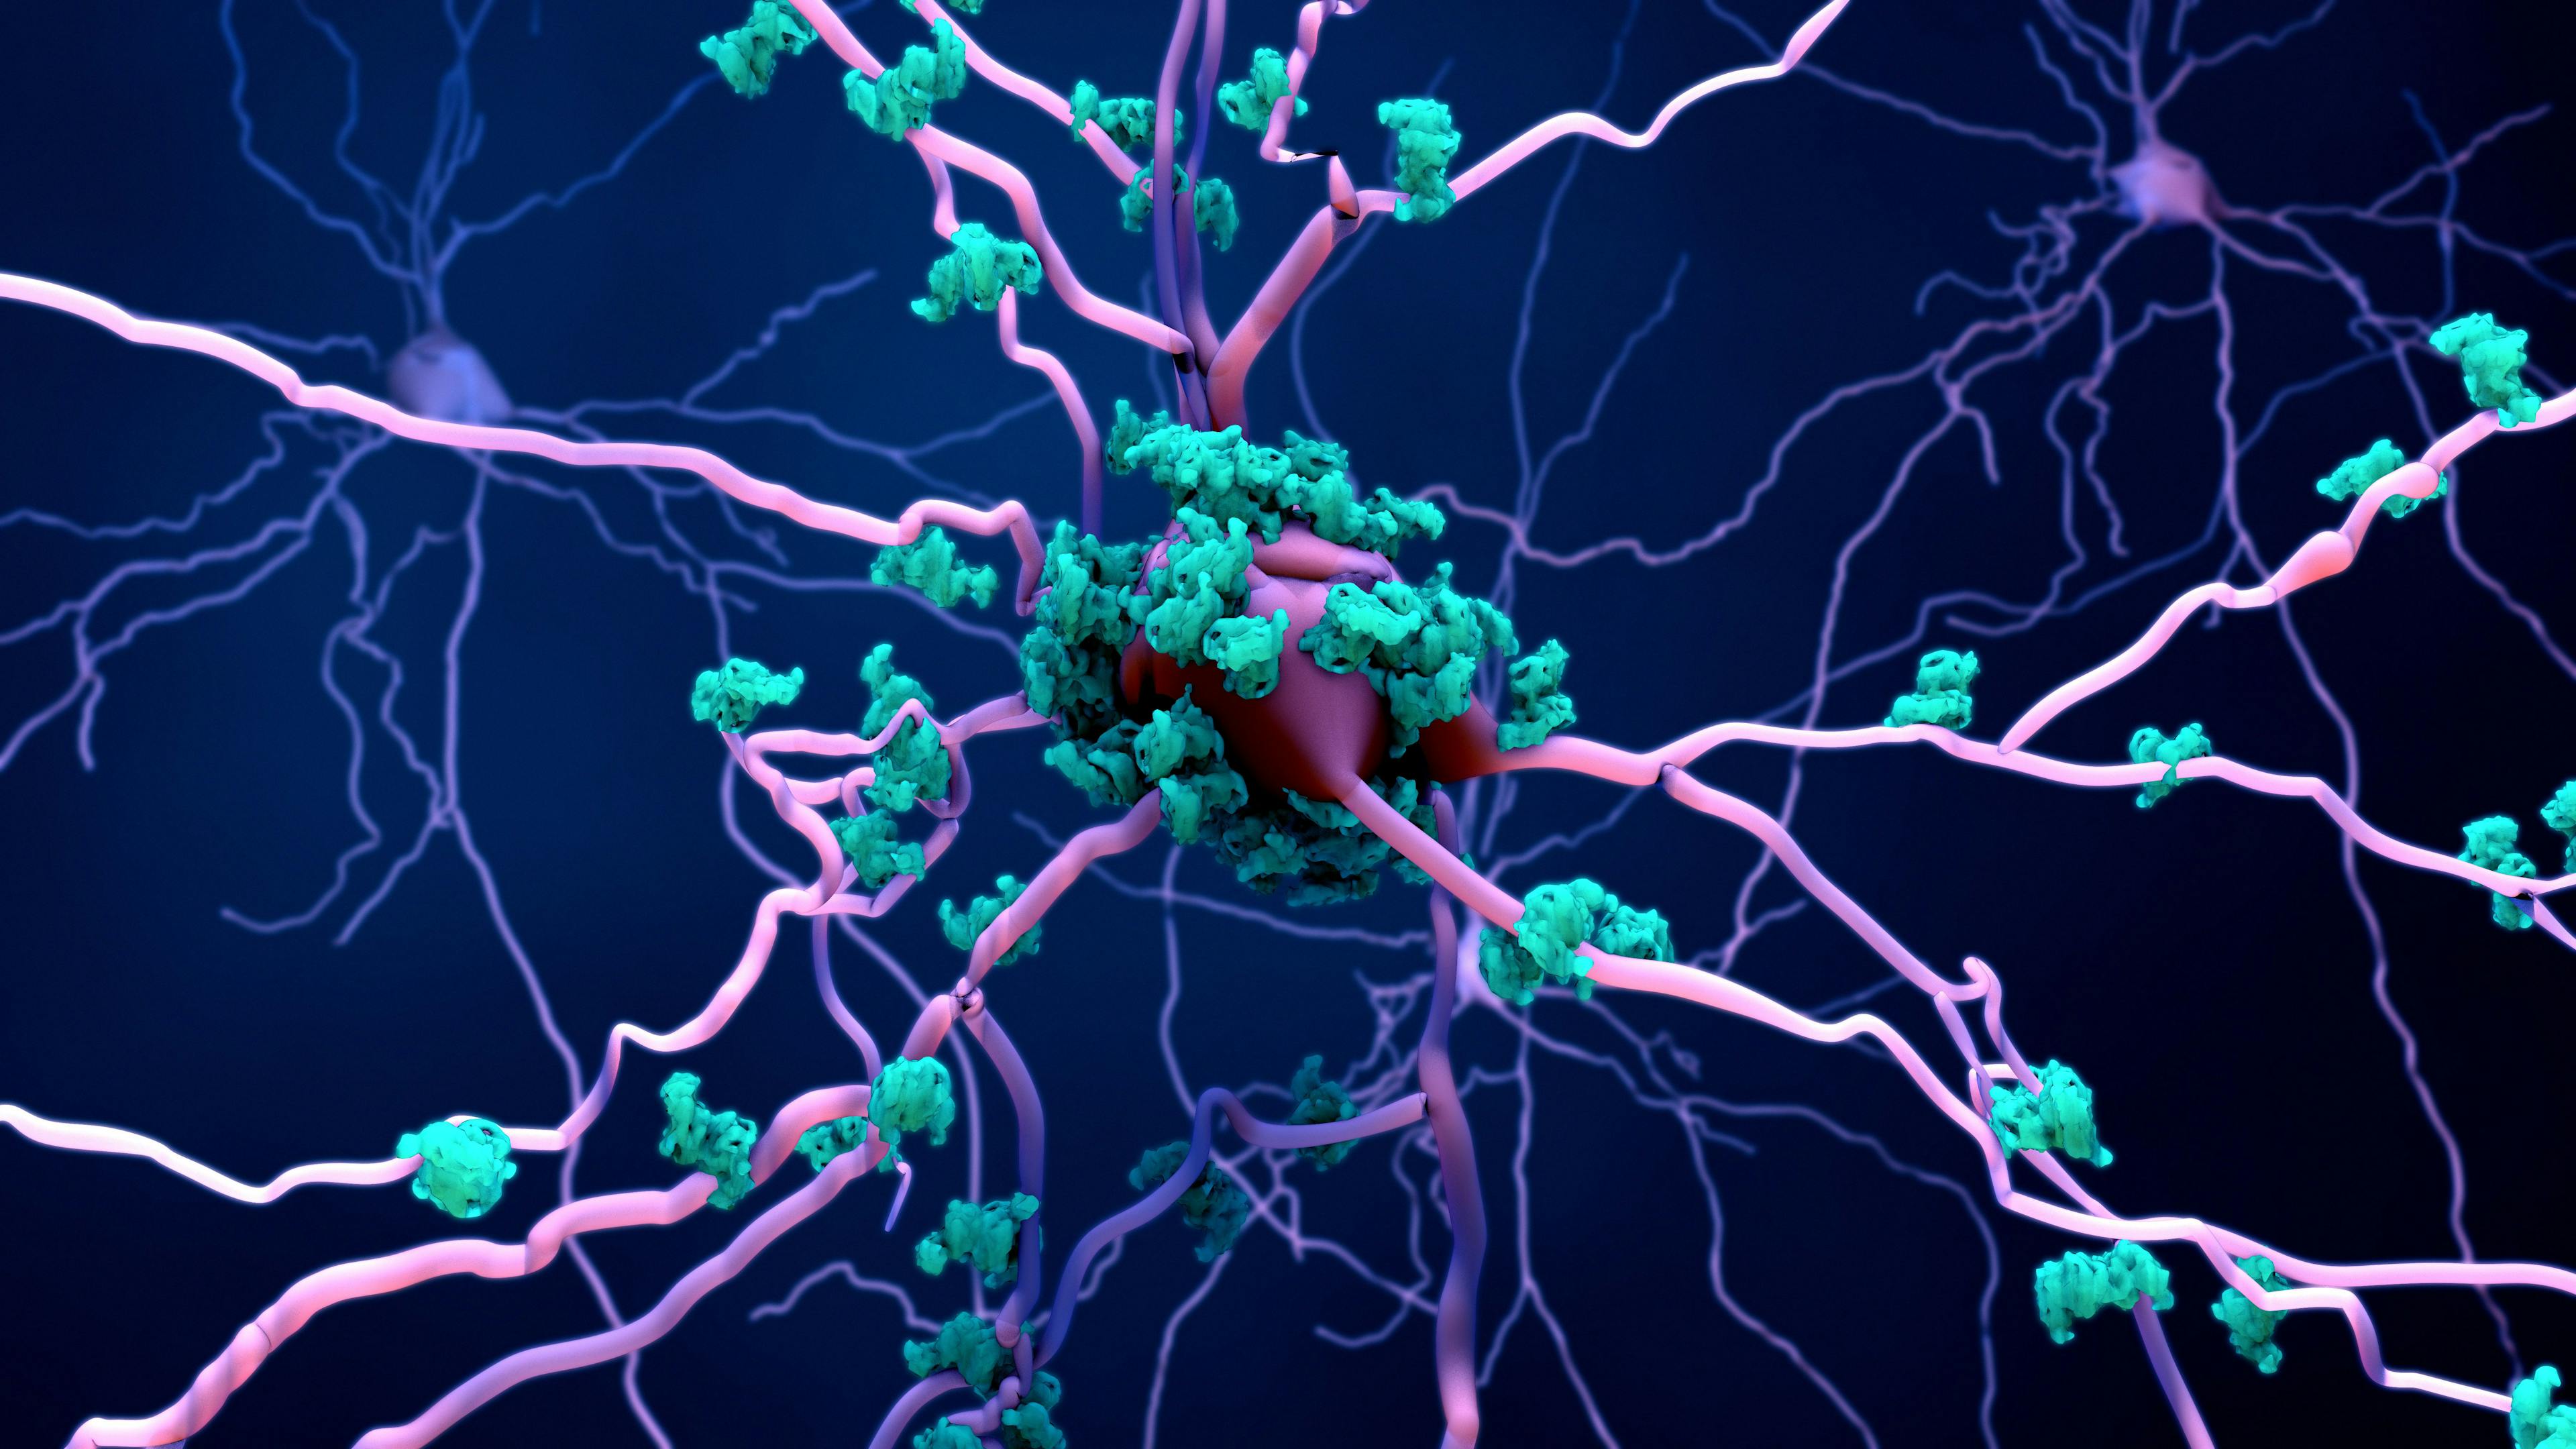 Death of neurons in the aging brain or Proteins in neurons | Image Credit: © Design Cells - stock.adobe.com